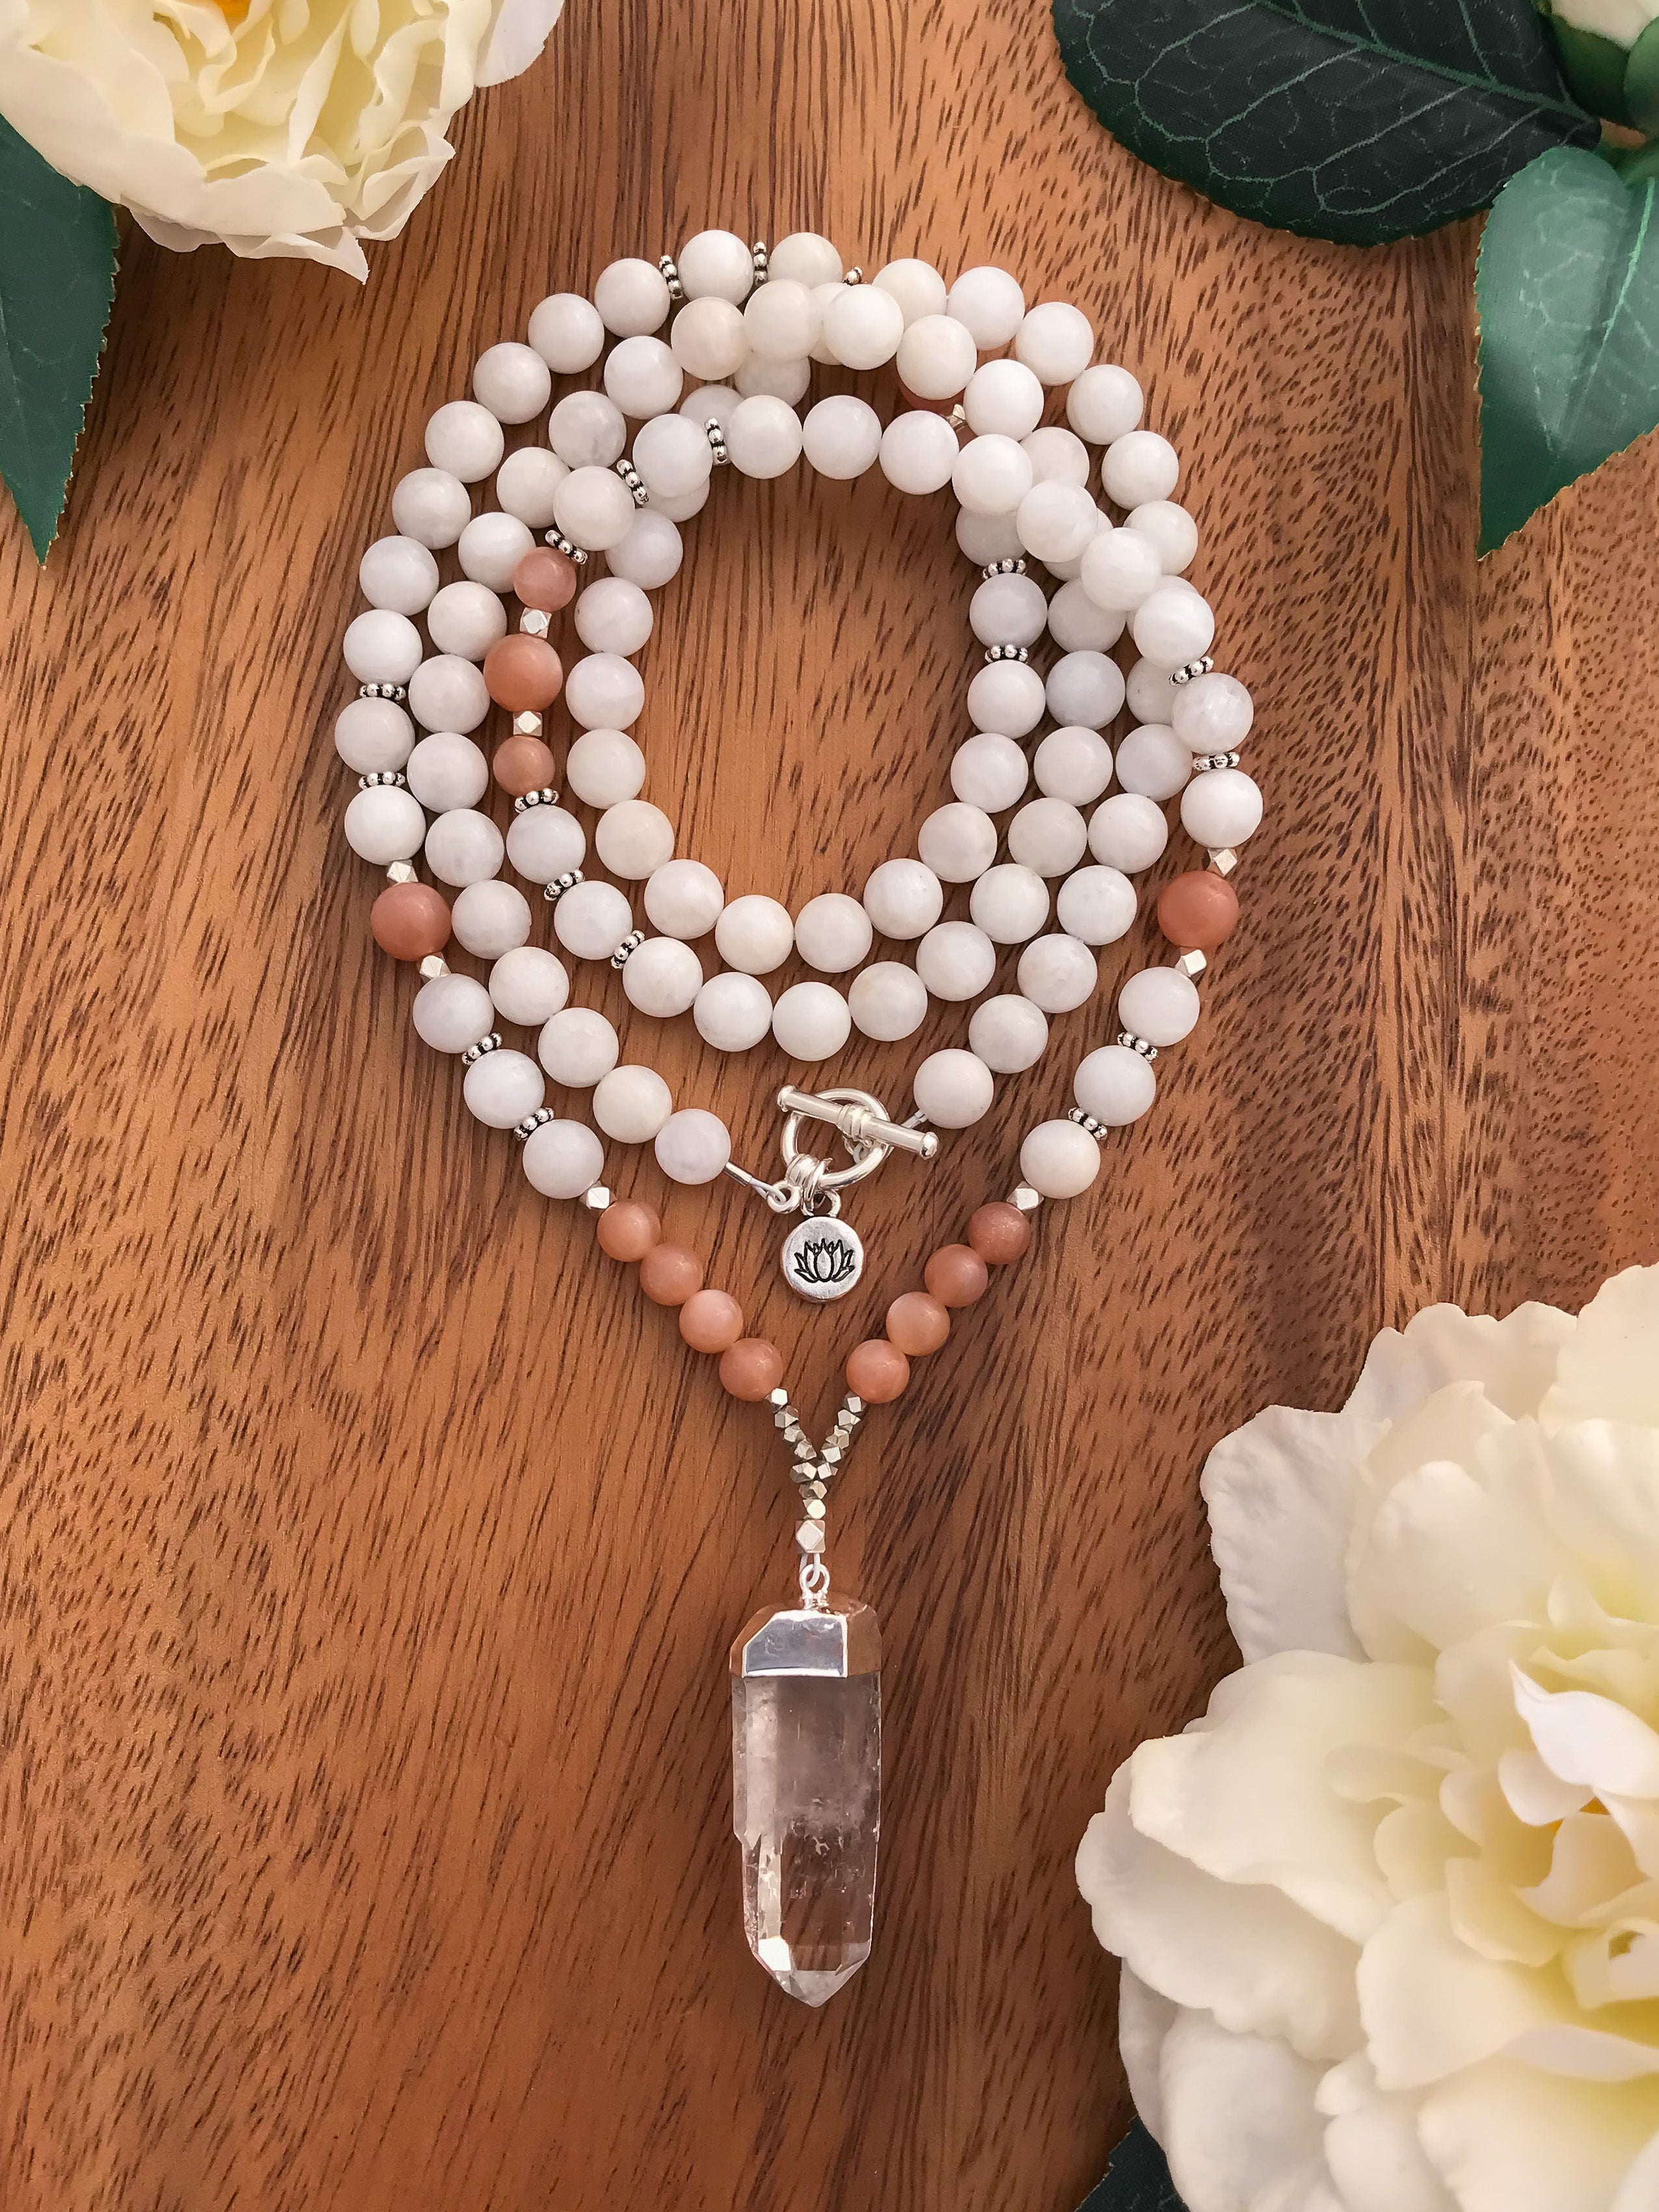 Moonstone and Sunstone 108 bead mala necklace with Quartz crystal point pendant, silver or gold, crystal jewelry